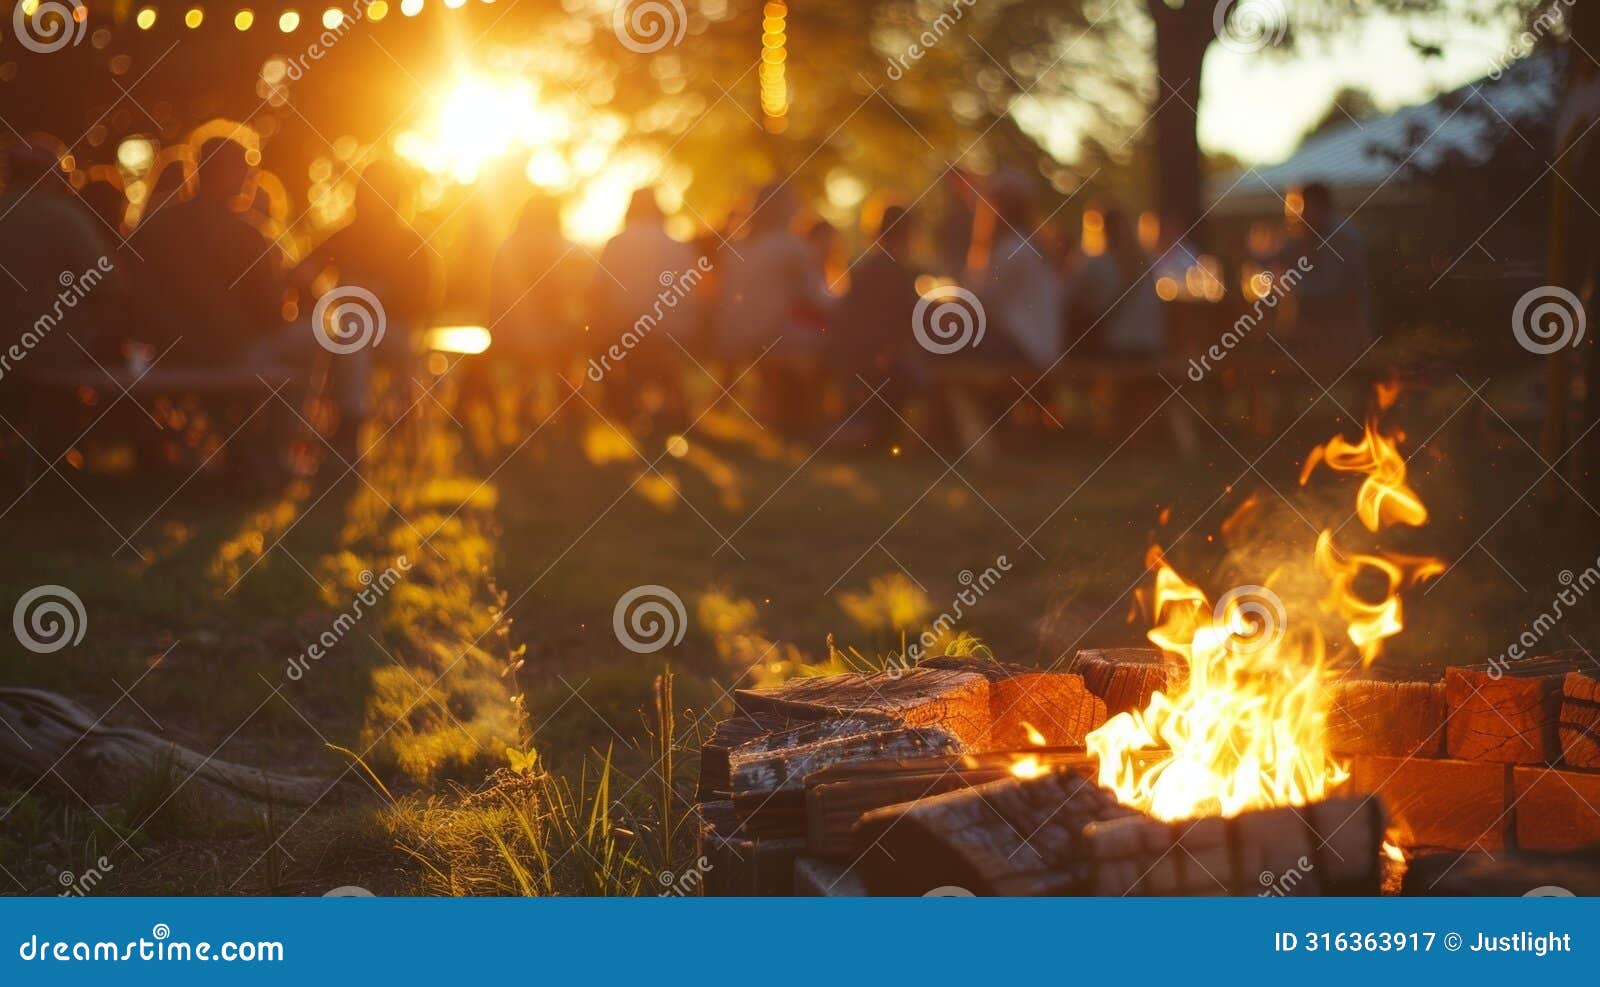 a bonfire is lit at sunset providing a cozy and intimate atmosphere for guests to gather and share stories at the sober